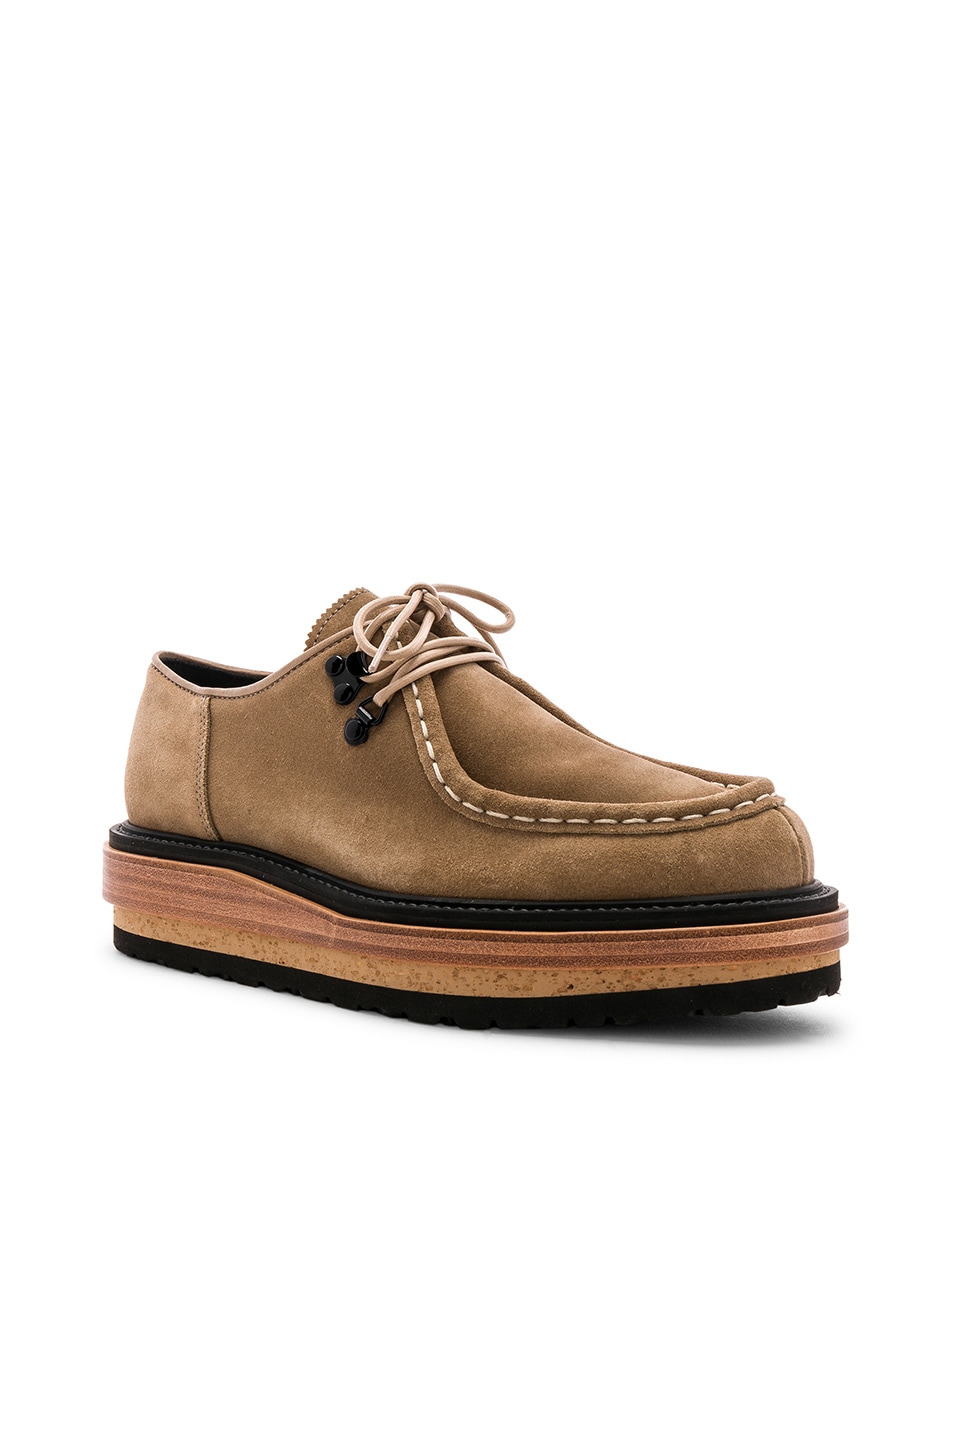 Image 1 of Sacai Suede Hybrid Sole Shoes in Beige